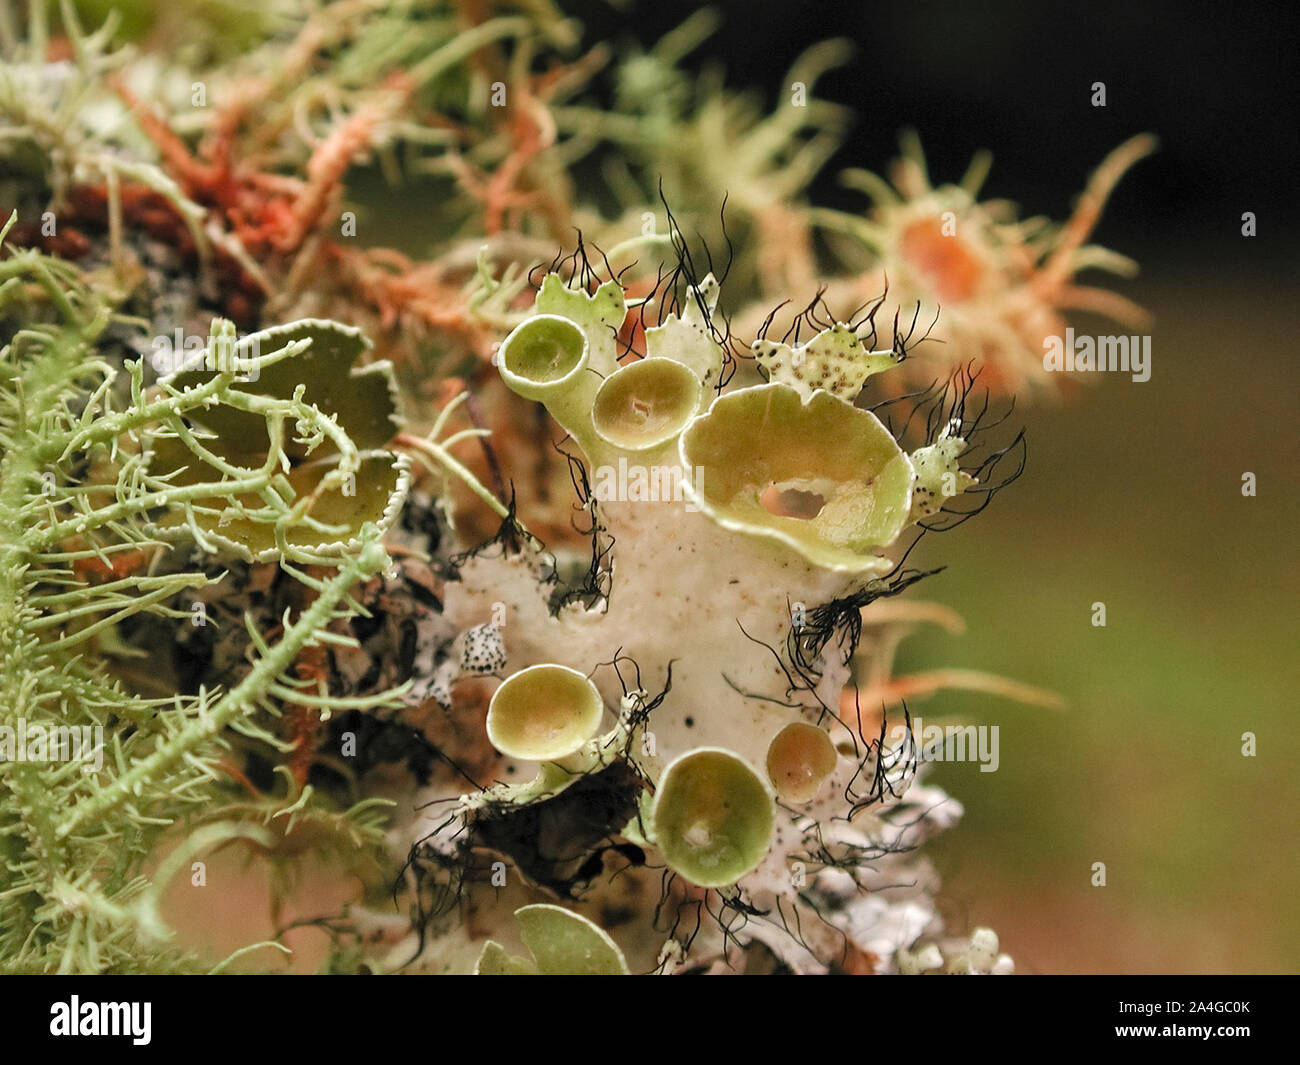 Lichens growing on a tree branch in a symbiotic relationship containing different fungal and algal organisms. Stock Photo